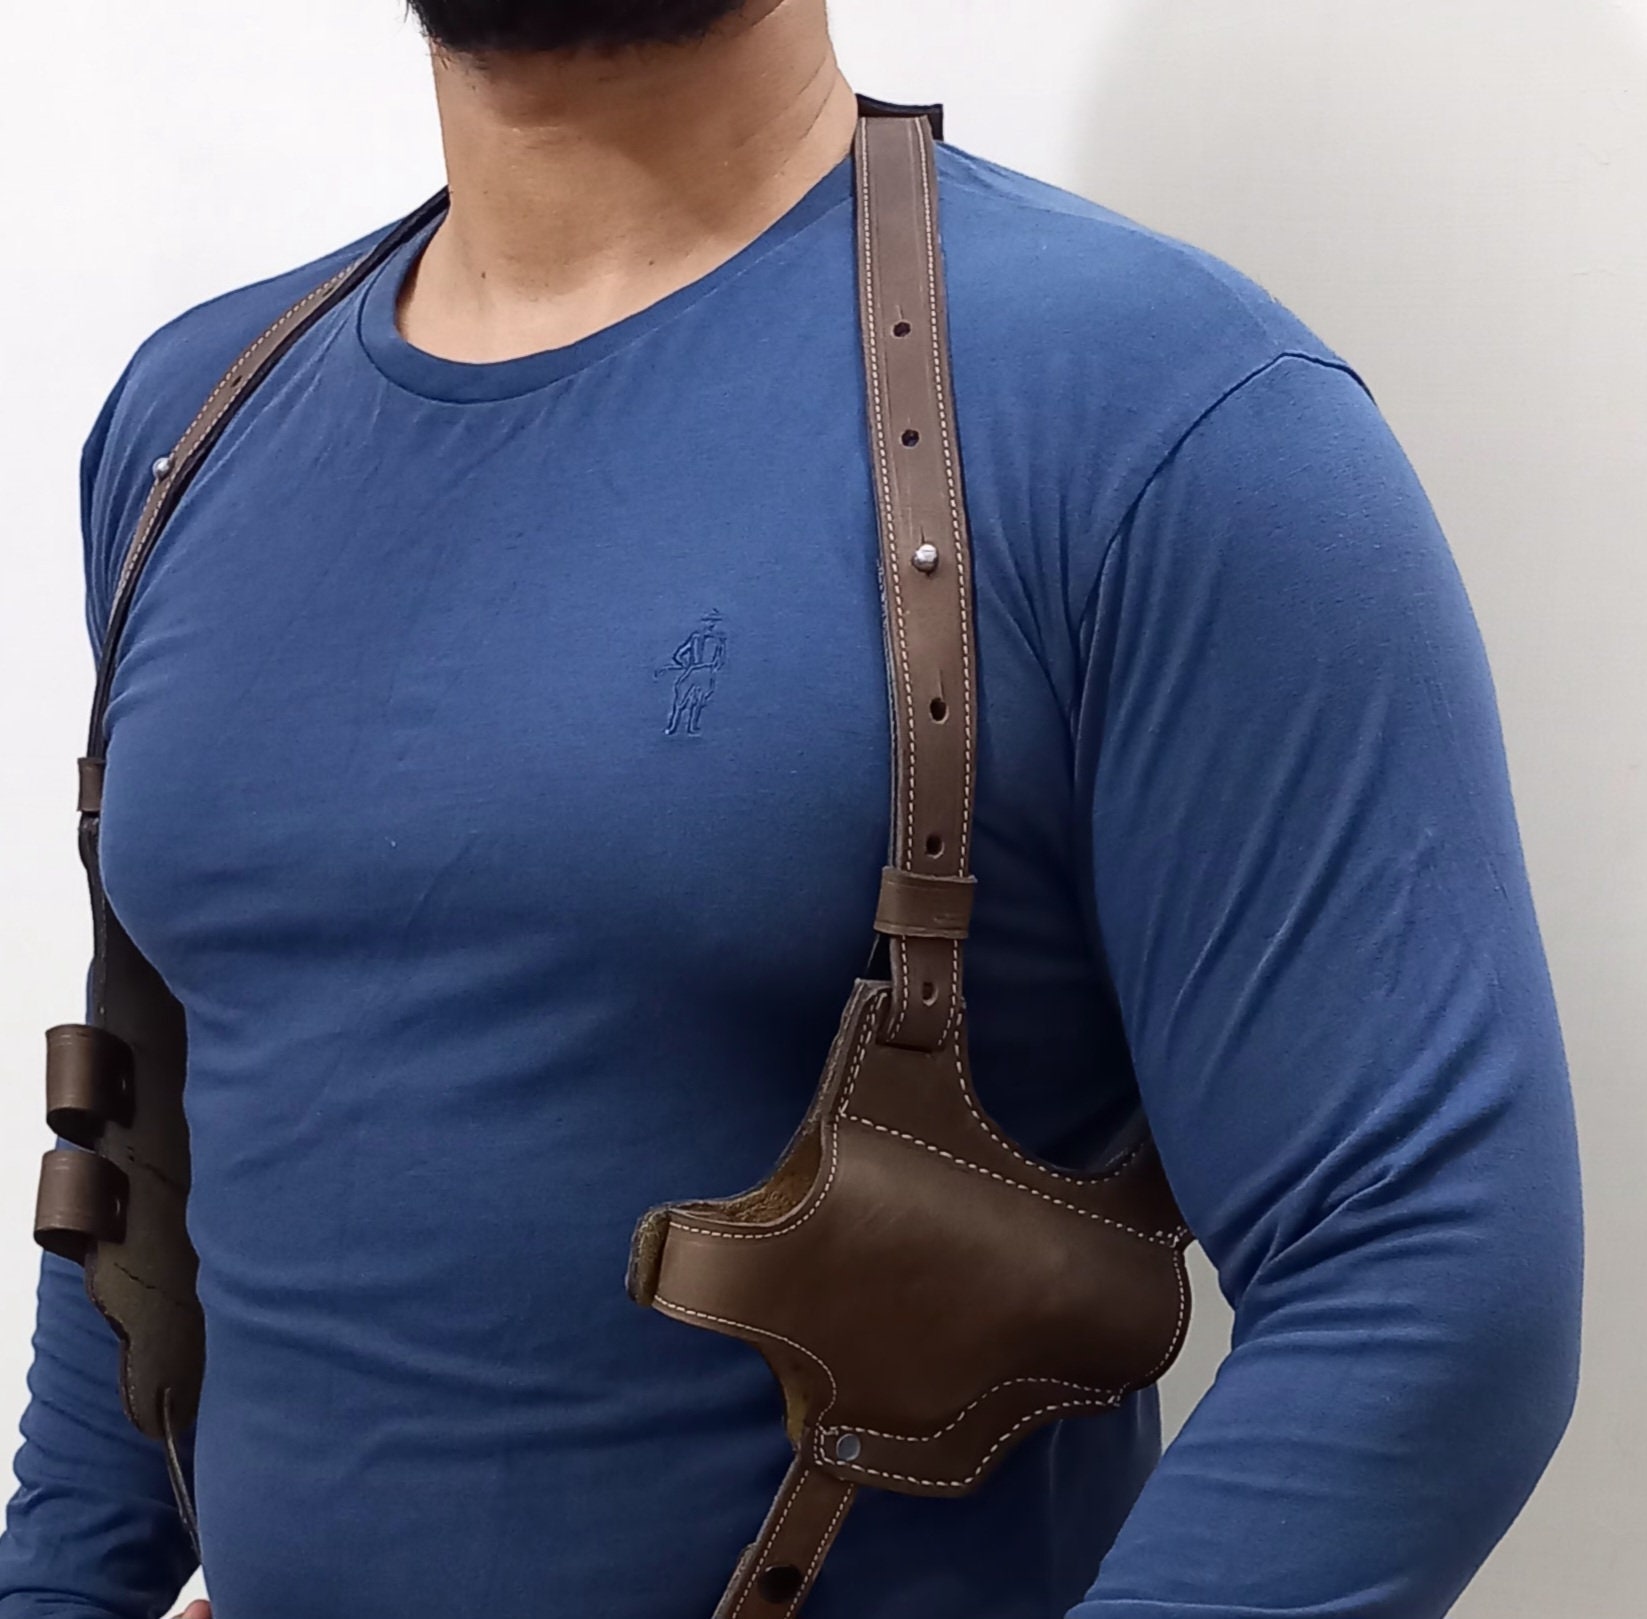 Xcoser Uncharted Nathan Drake Shoulder Holster Deluxe PU Cosplay Costume  Accessories Brown